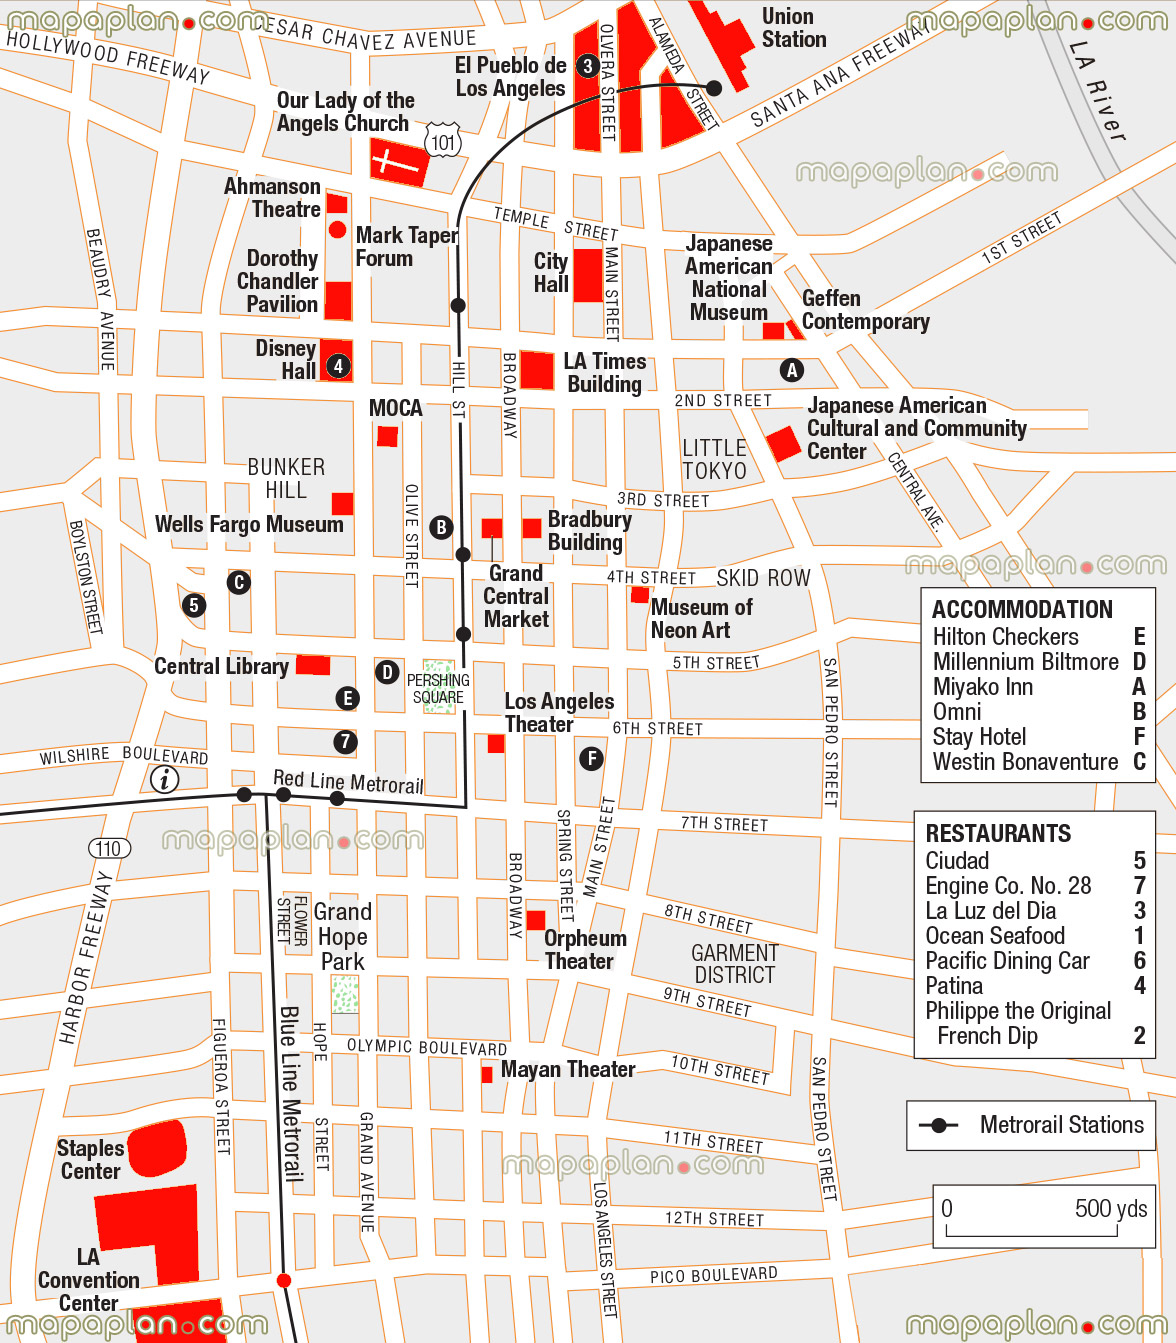 Los Angeles map - Downtown tourist guide showing local Metrorail